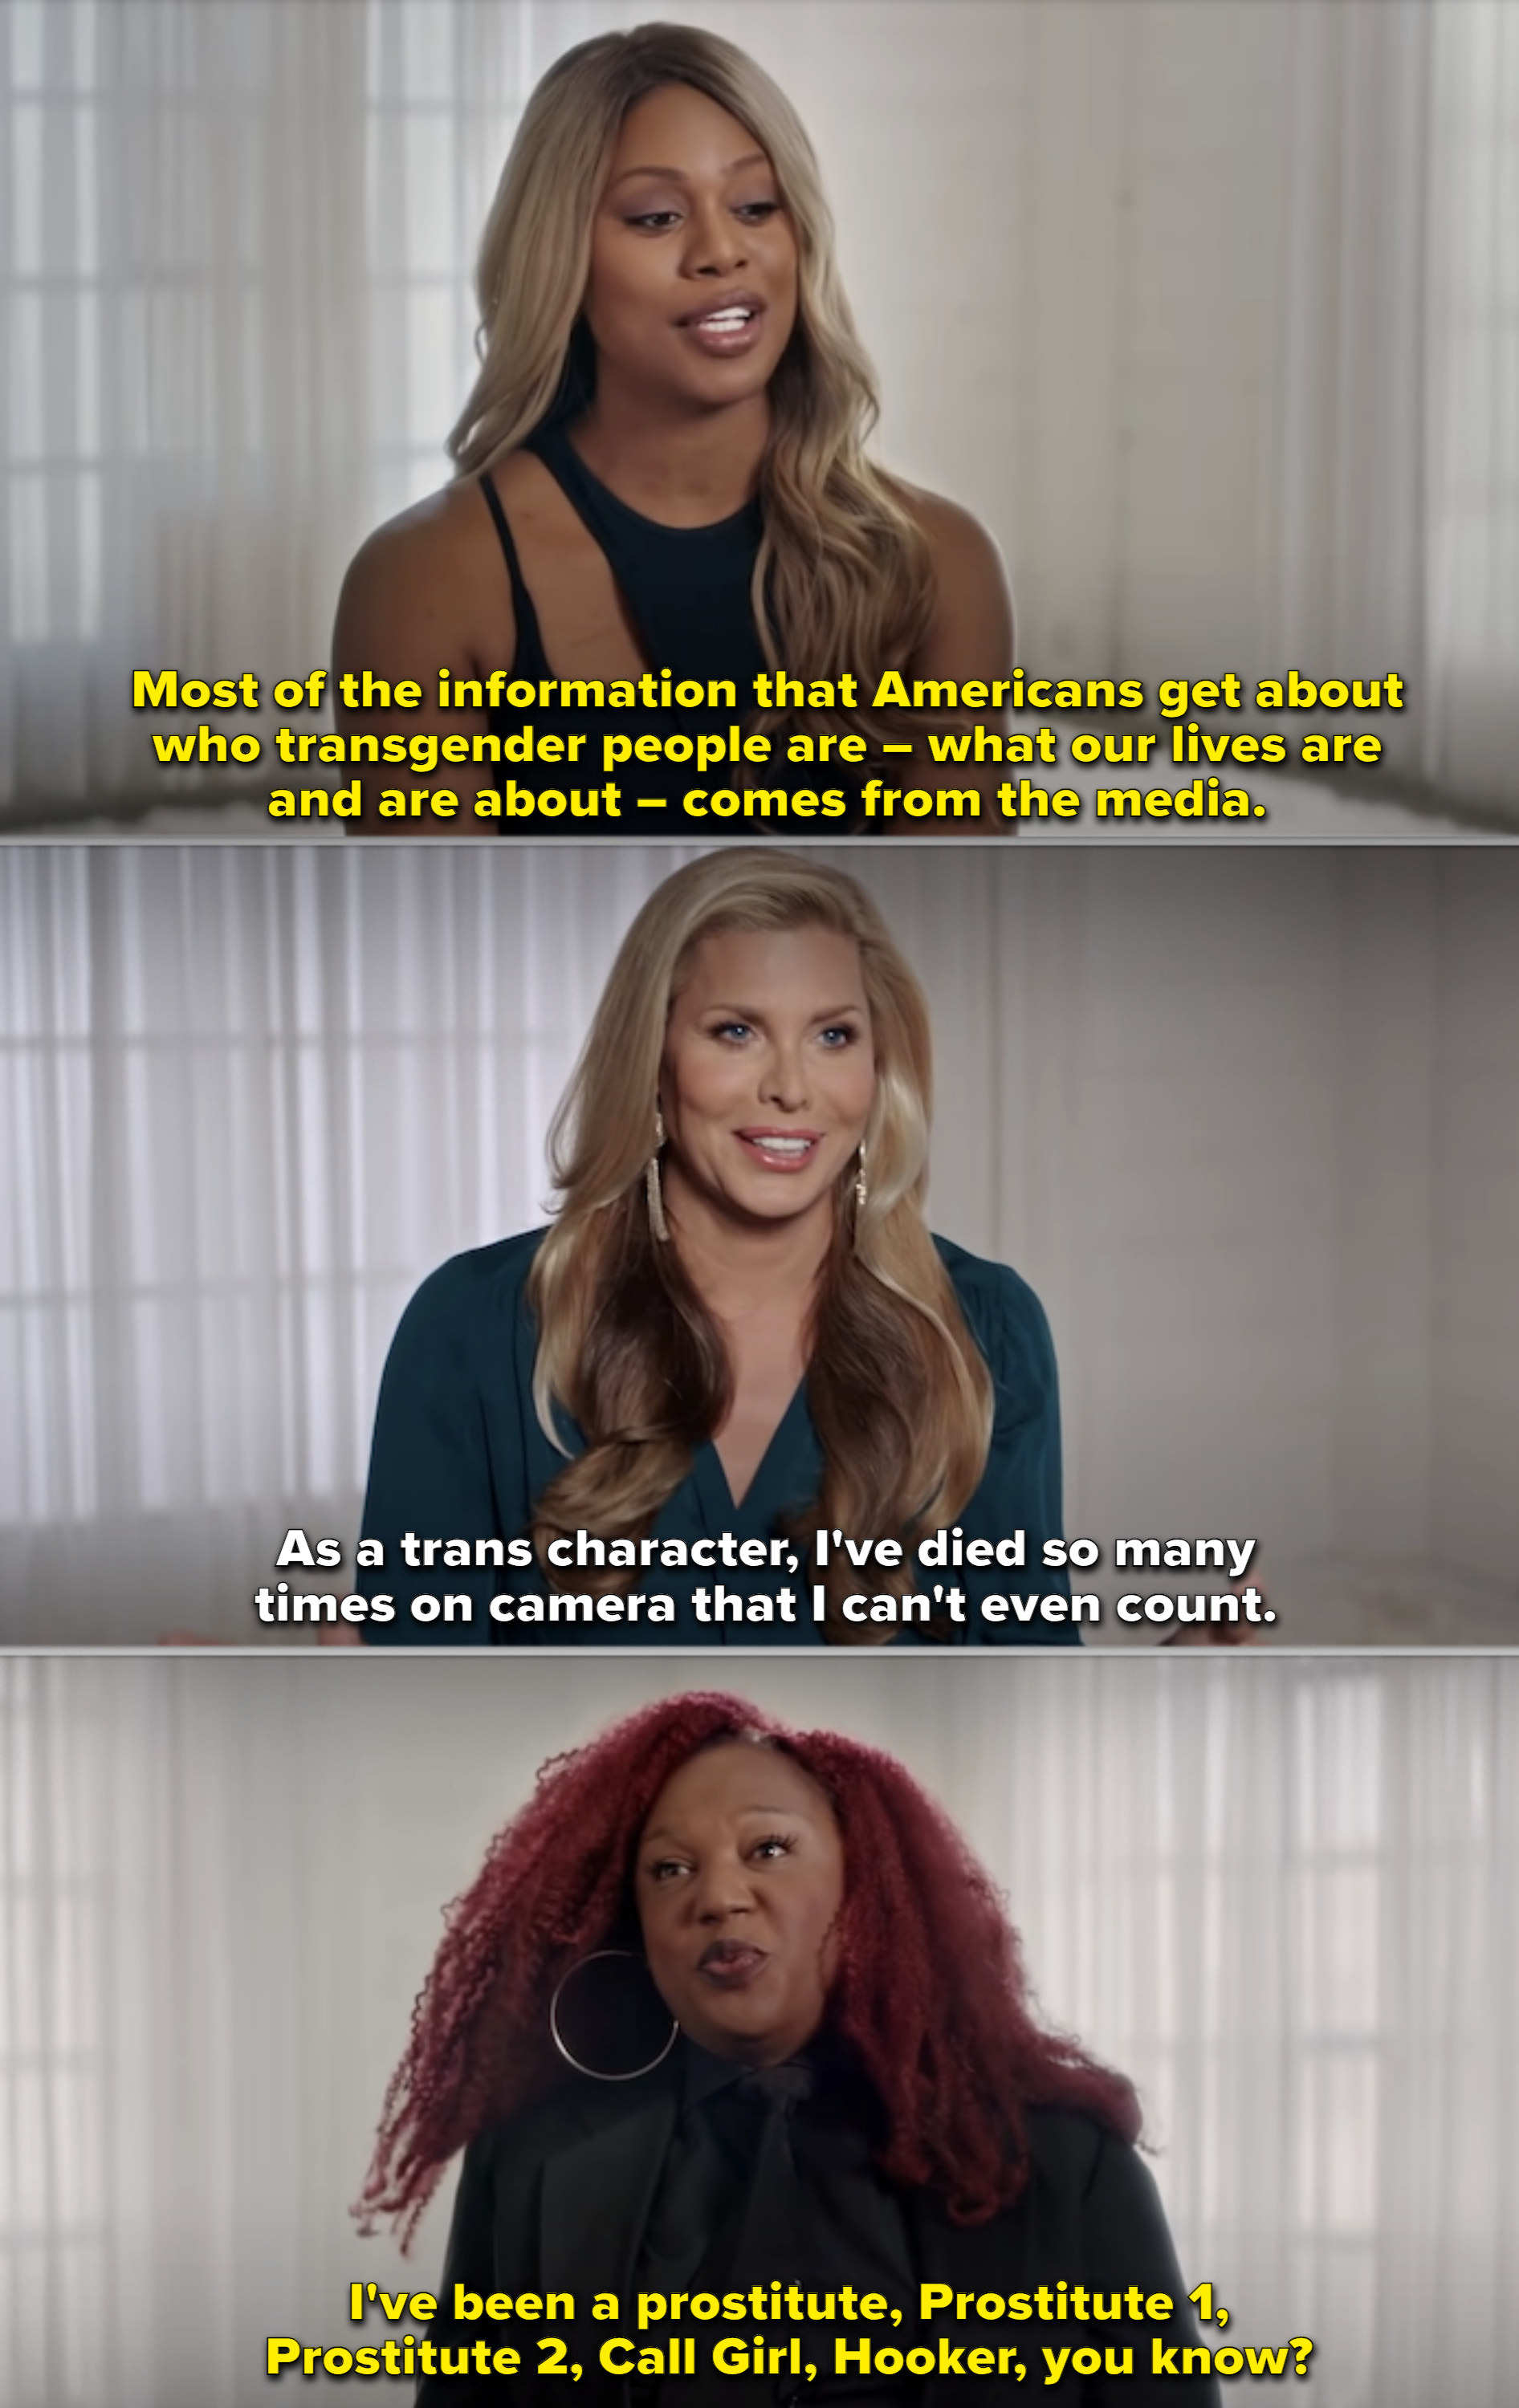 Famous actors being interviewed in the documentary about their experiences playing trans characters